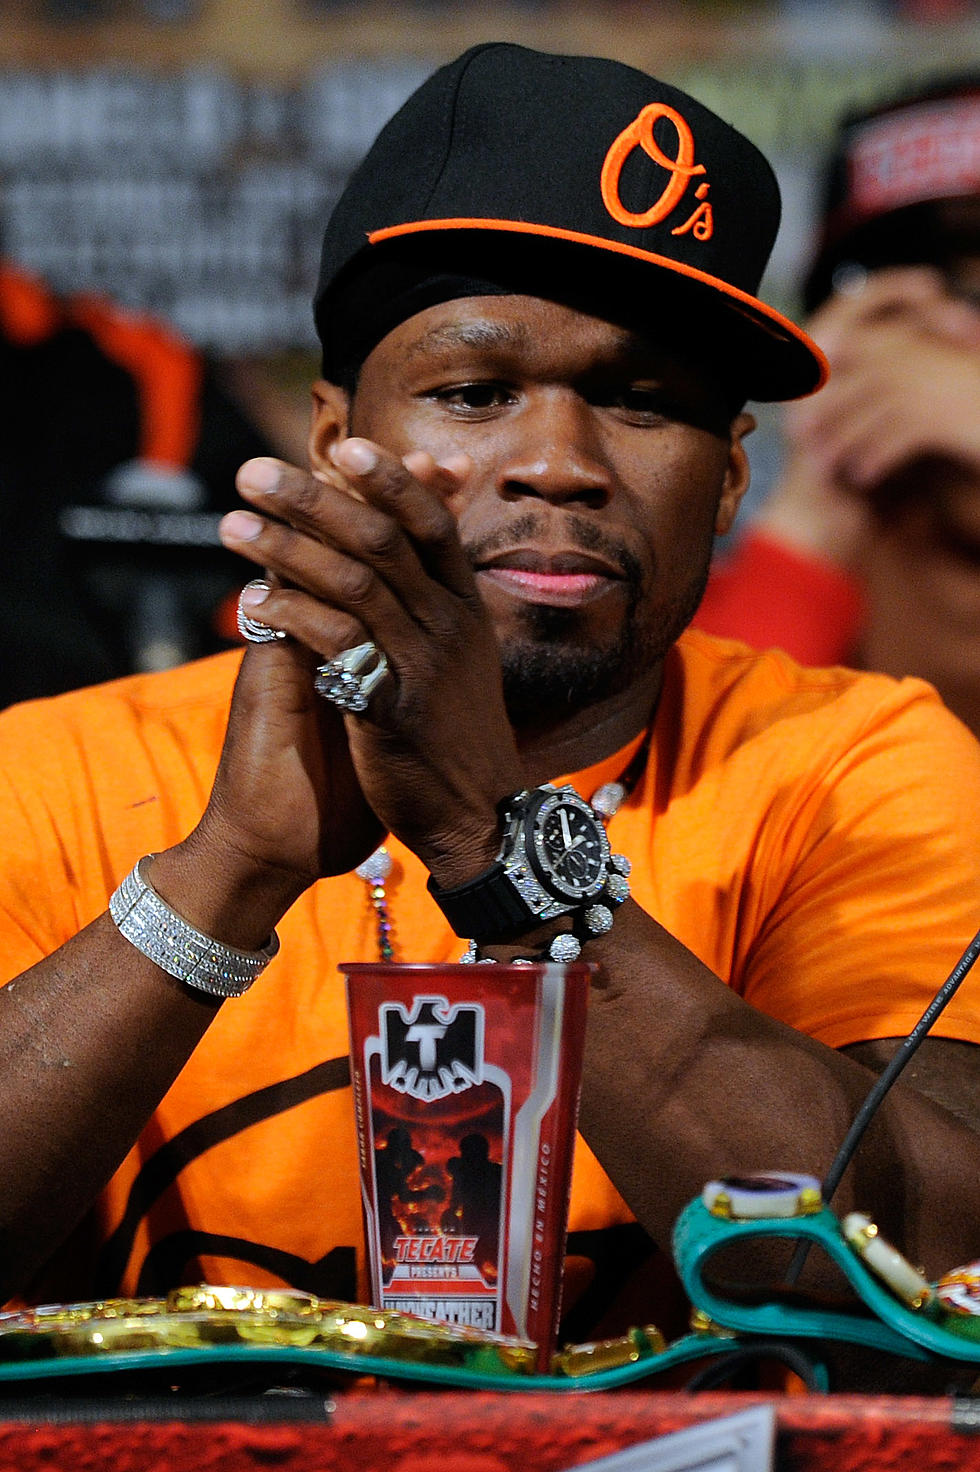 50 Cent Disses Lil Wayne In New Song: Love, Hate, Love [Exclusive of The Day]